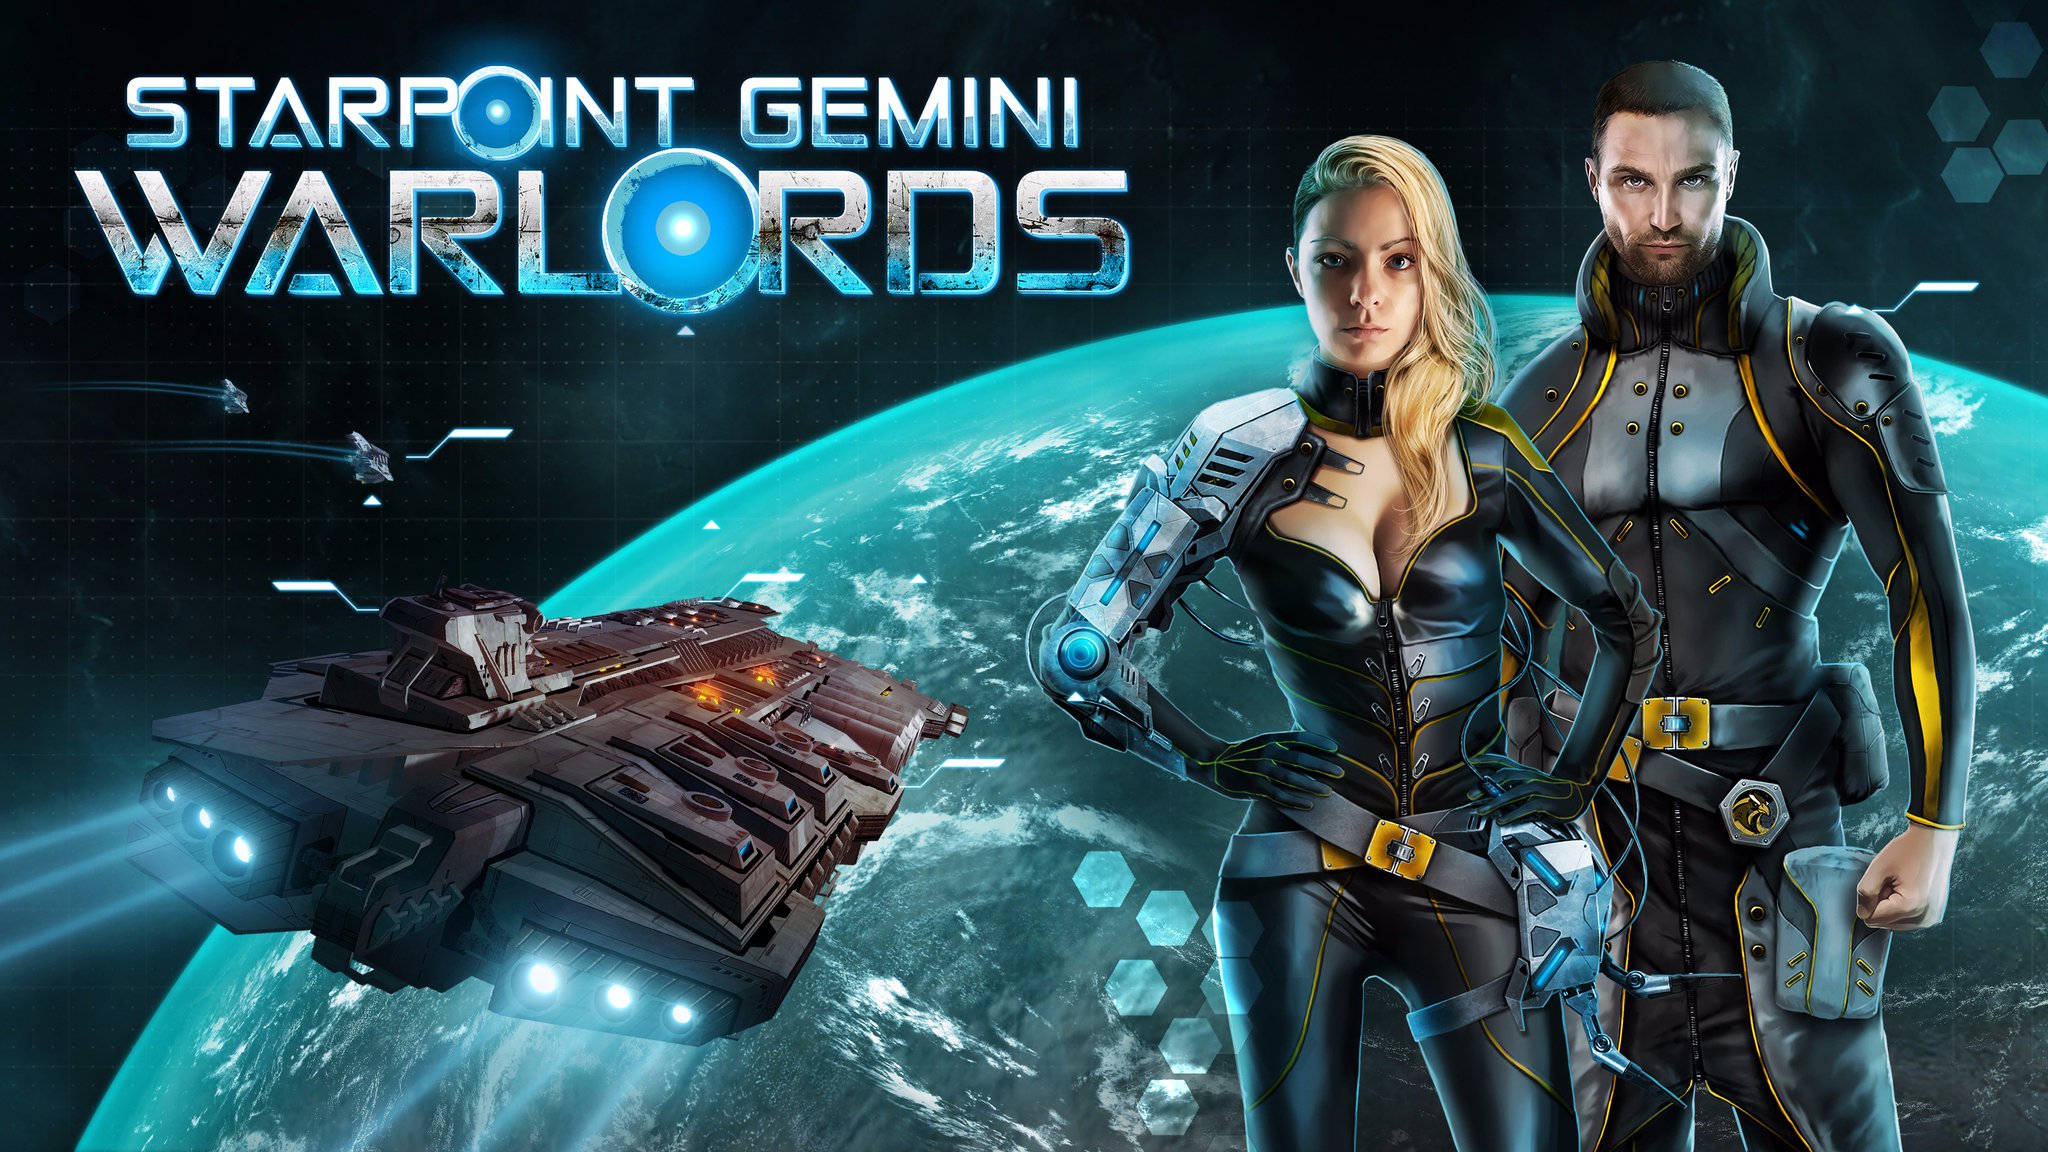 Starpoint Gemini 3 Tara Higgs And Our Player Are Ready For Spgw Release On Steam In A Few Hours Indiedev Gamedev Space